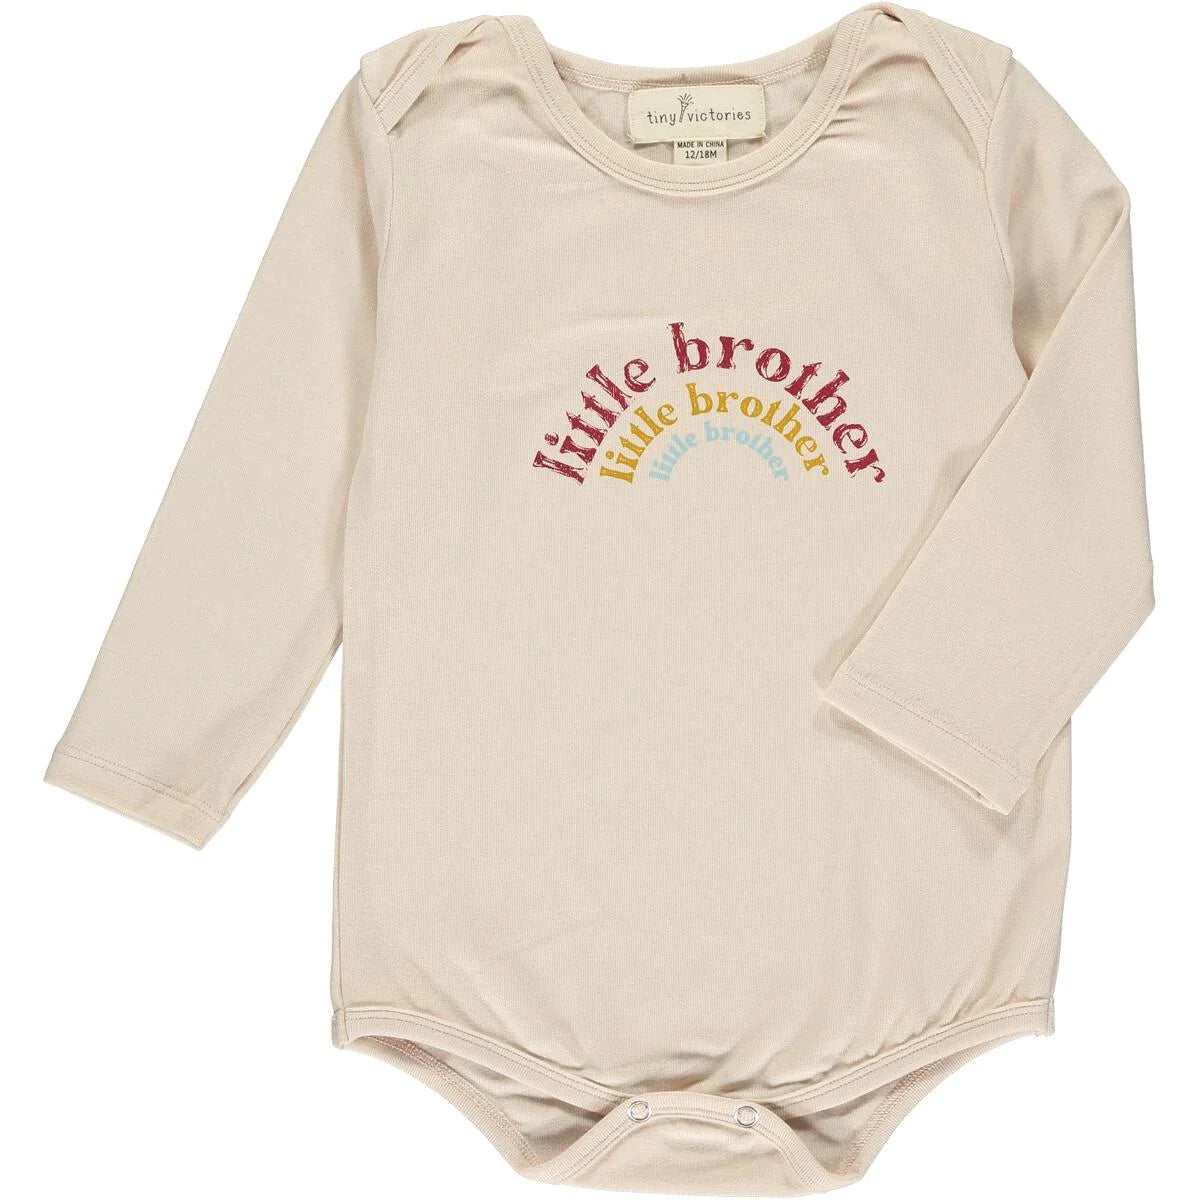 Tiny Victories Little Brother/Sister Onesie + More Options